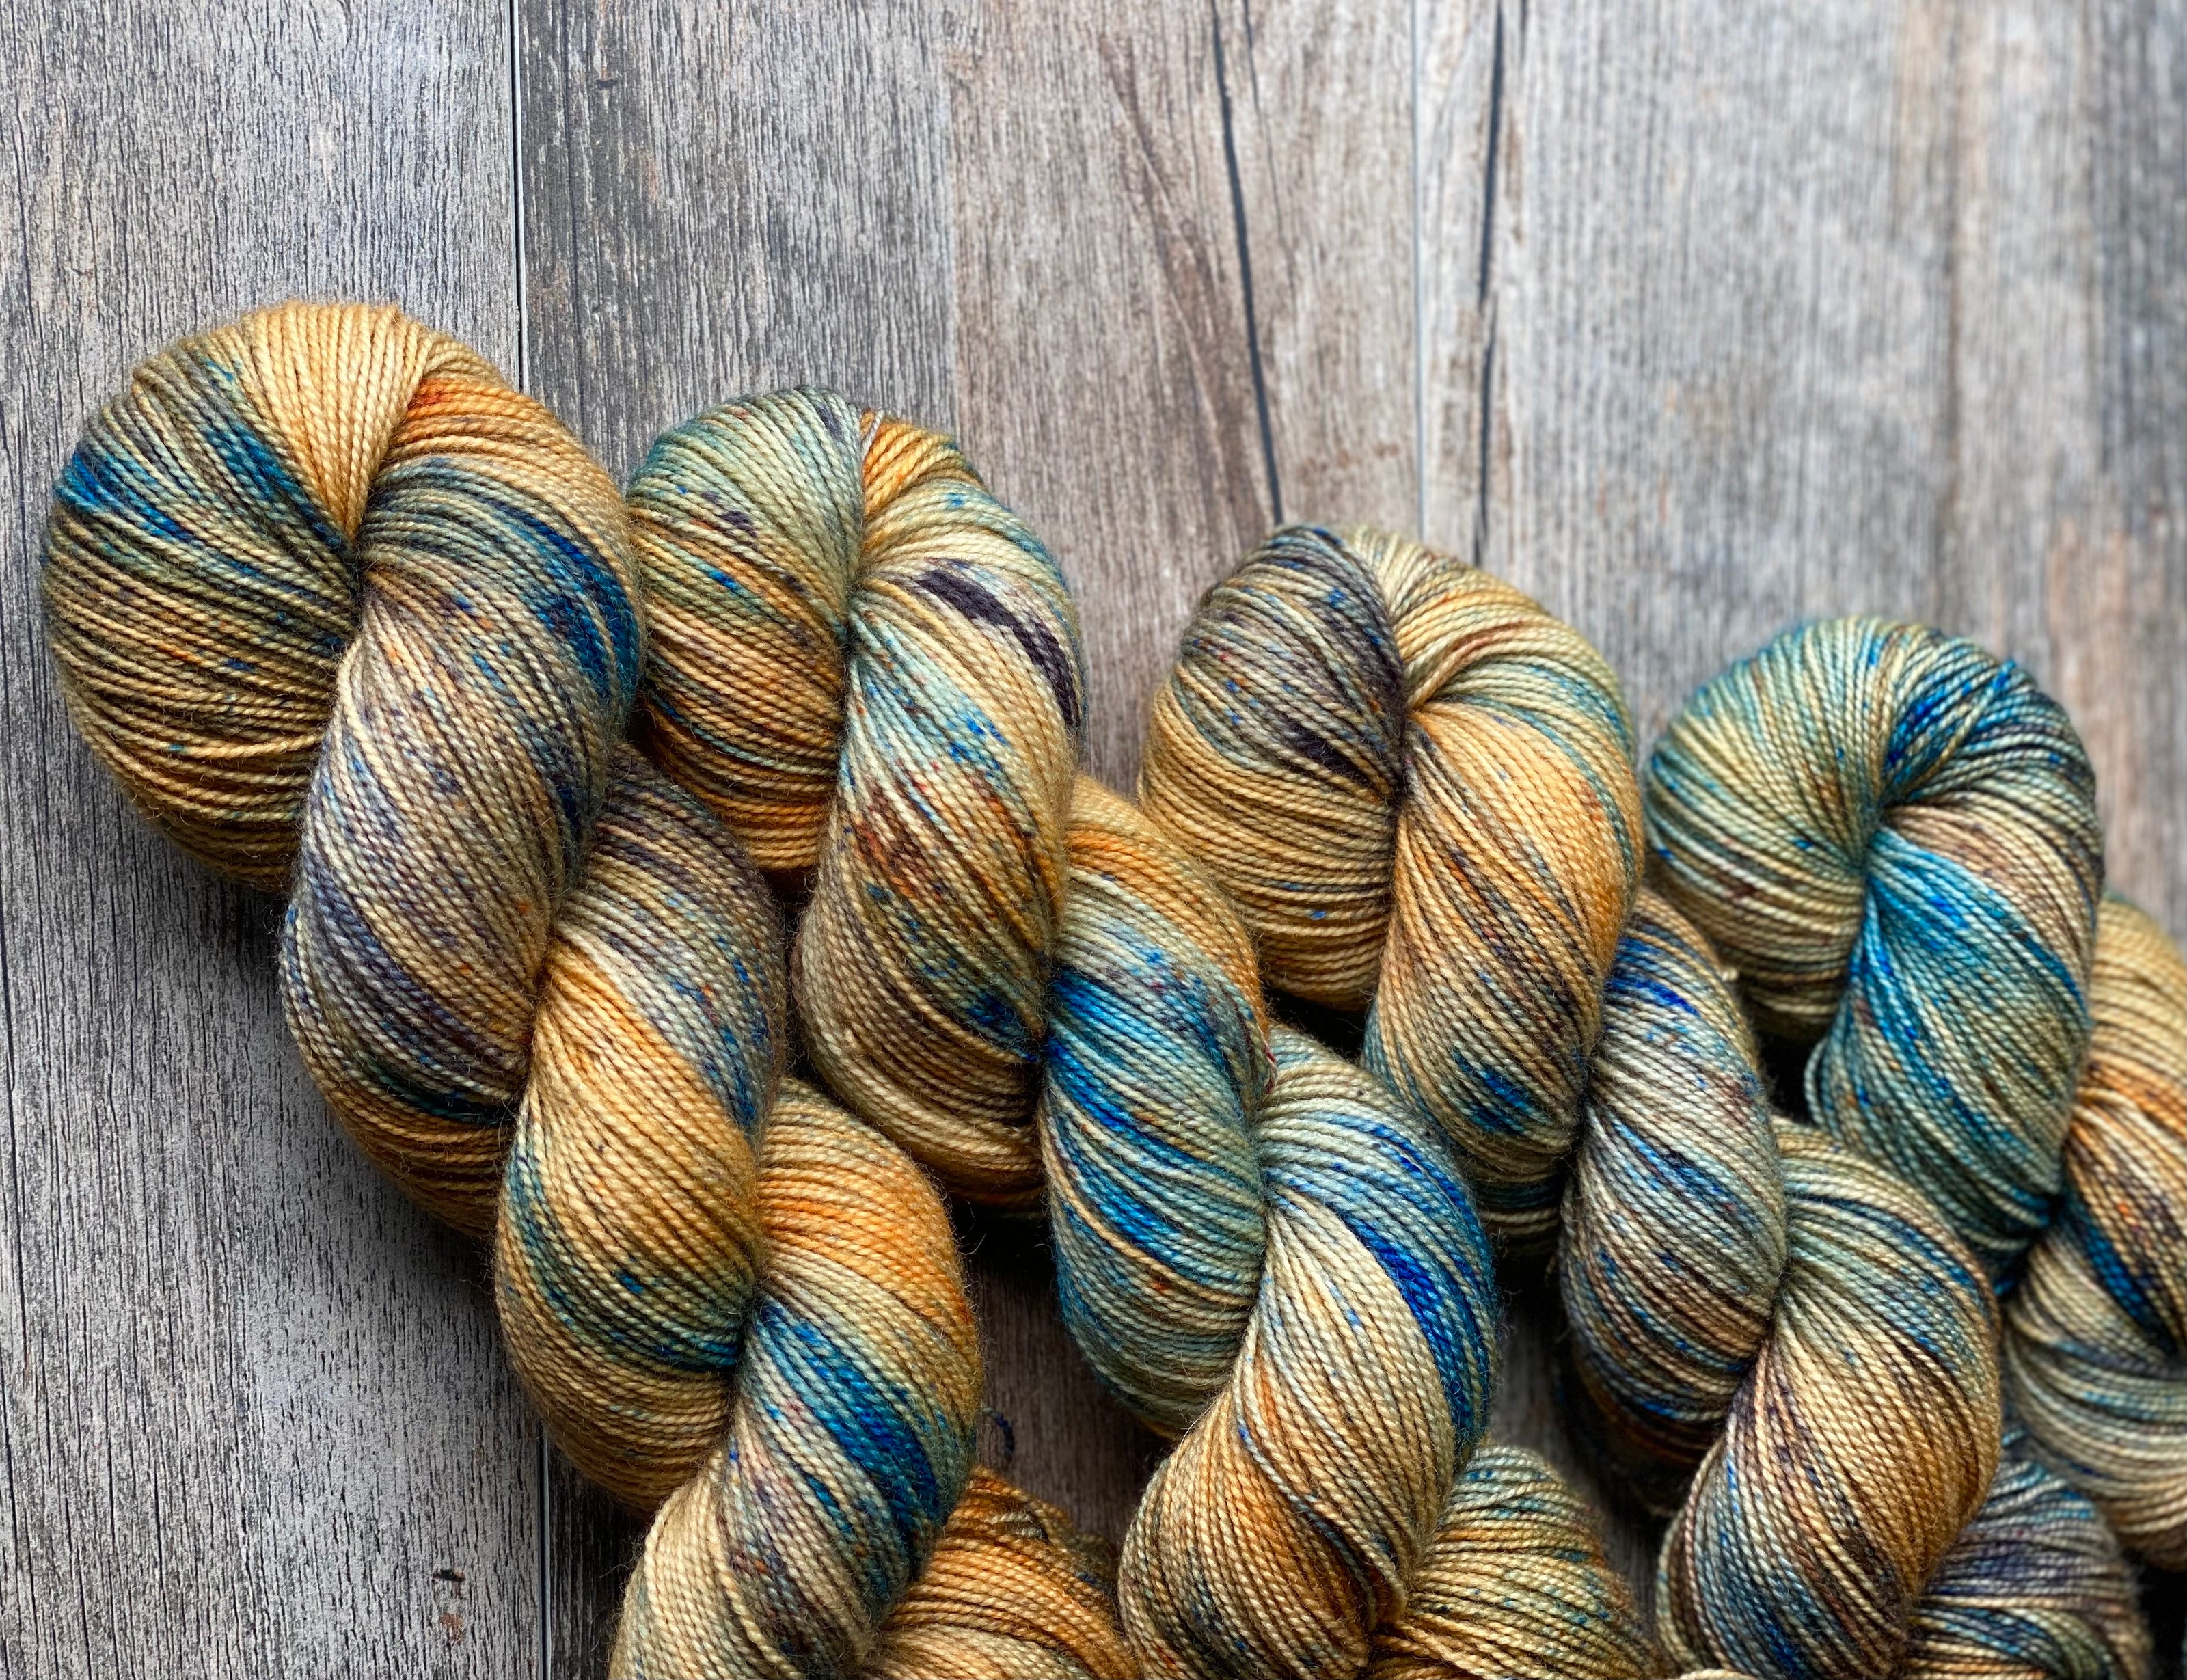 Rust and blue hand dyed yarn skeins